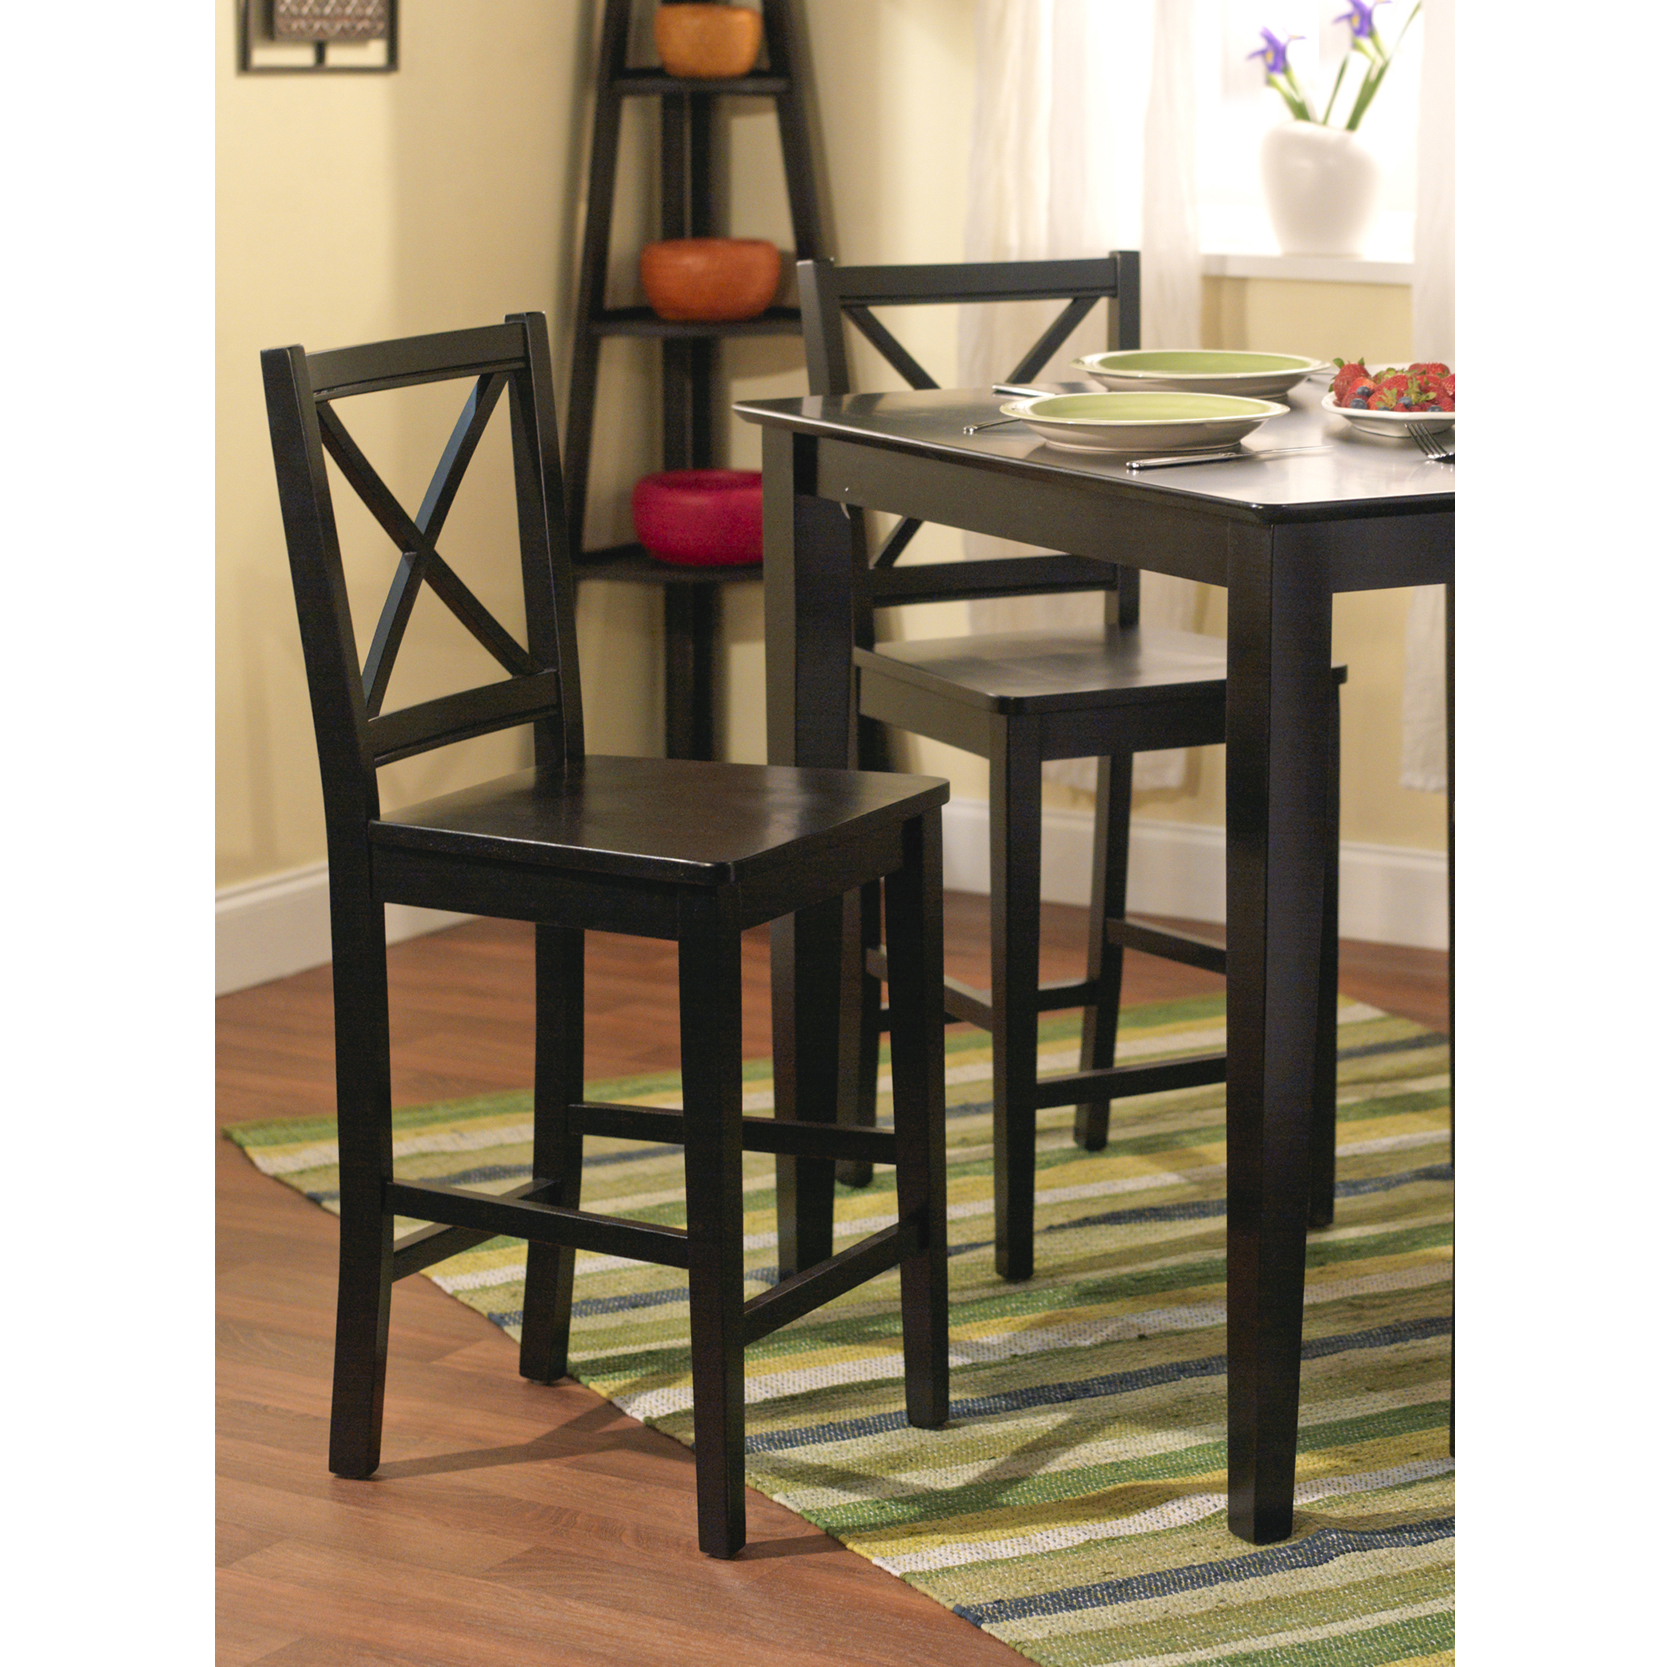 TMS Virginia Cross-Back 24" Counter Stools,Black, Set of 2 - image 3 of 6